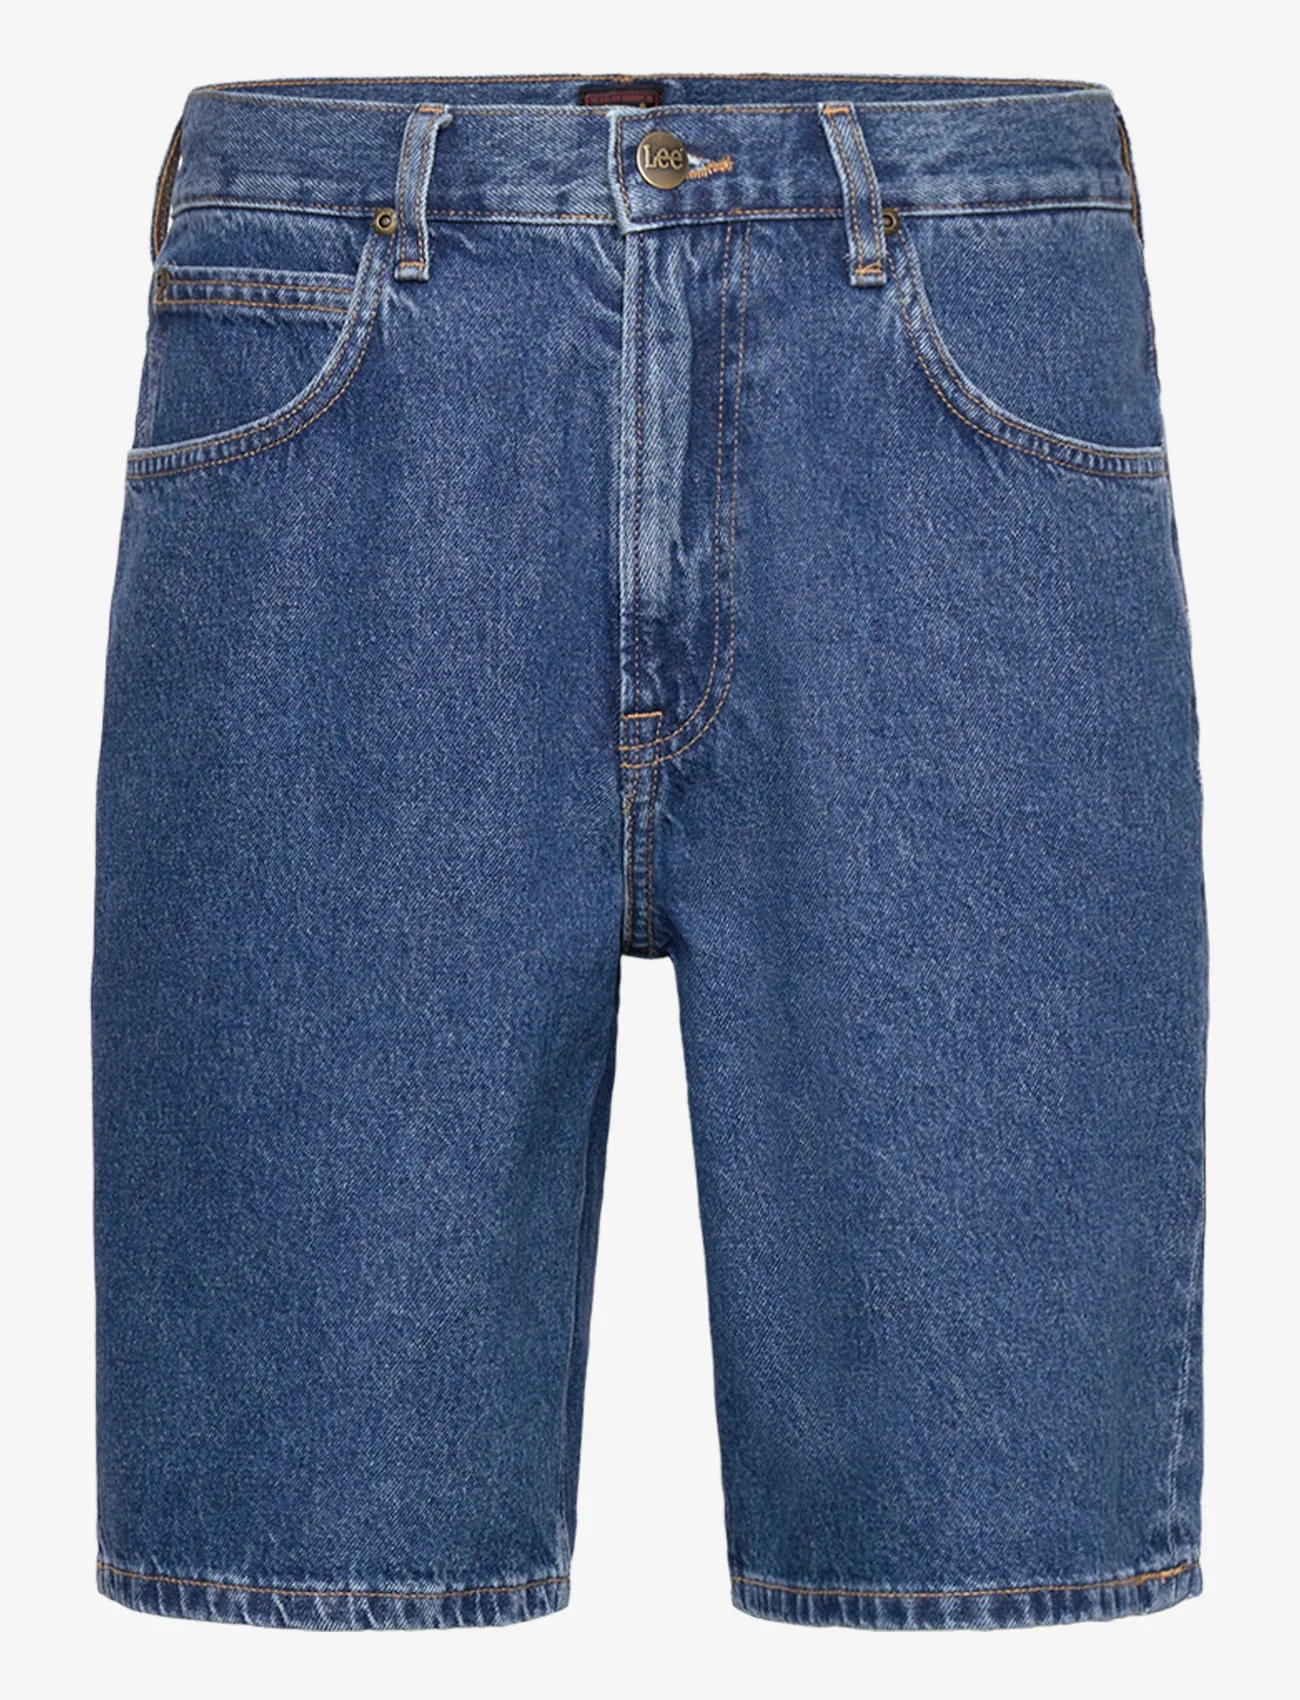 Lee Jeans - ASHER SHORT - jeans shorts - mid stone wash - 0